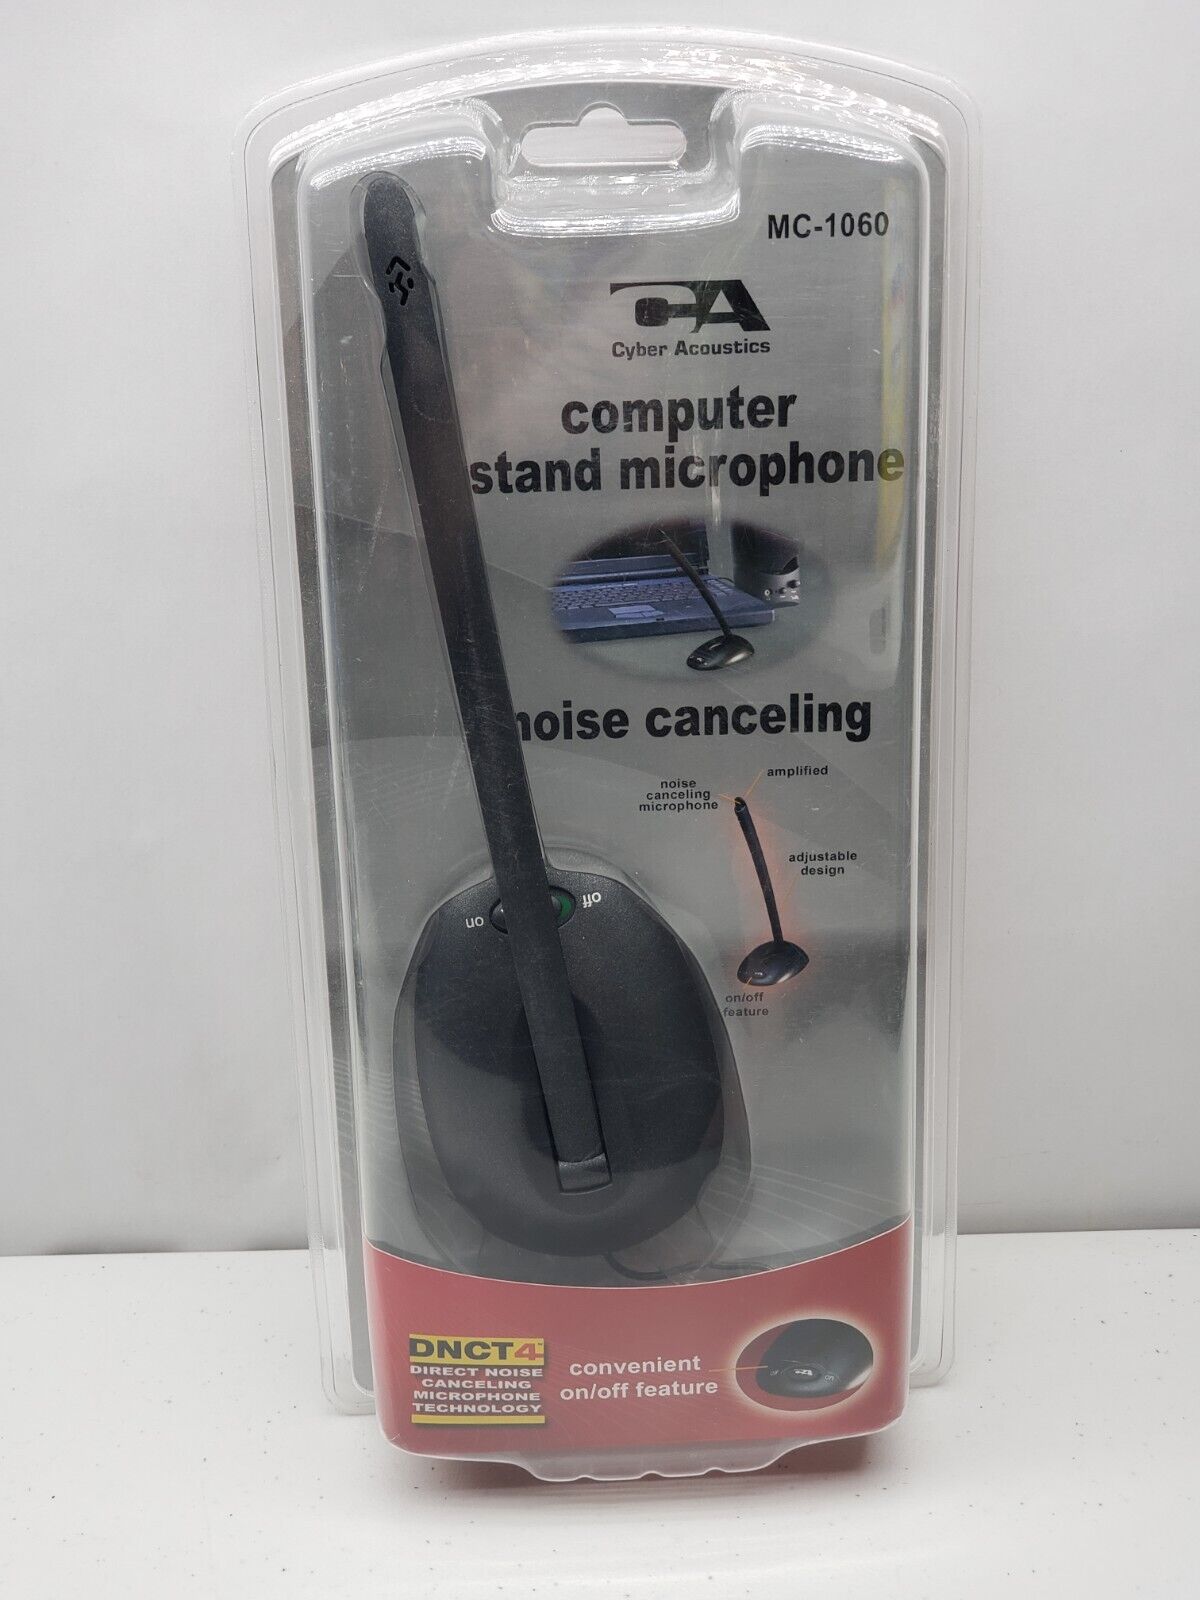 Brand new Cyber Acoustics MC-1060 Noise Canceling Stand Microphone SEALED